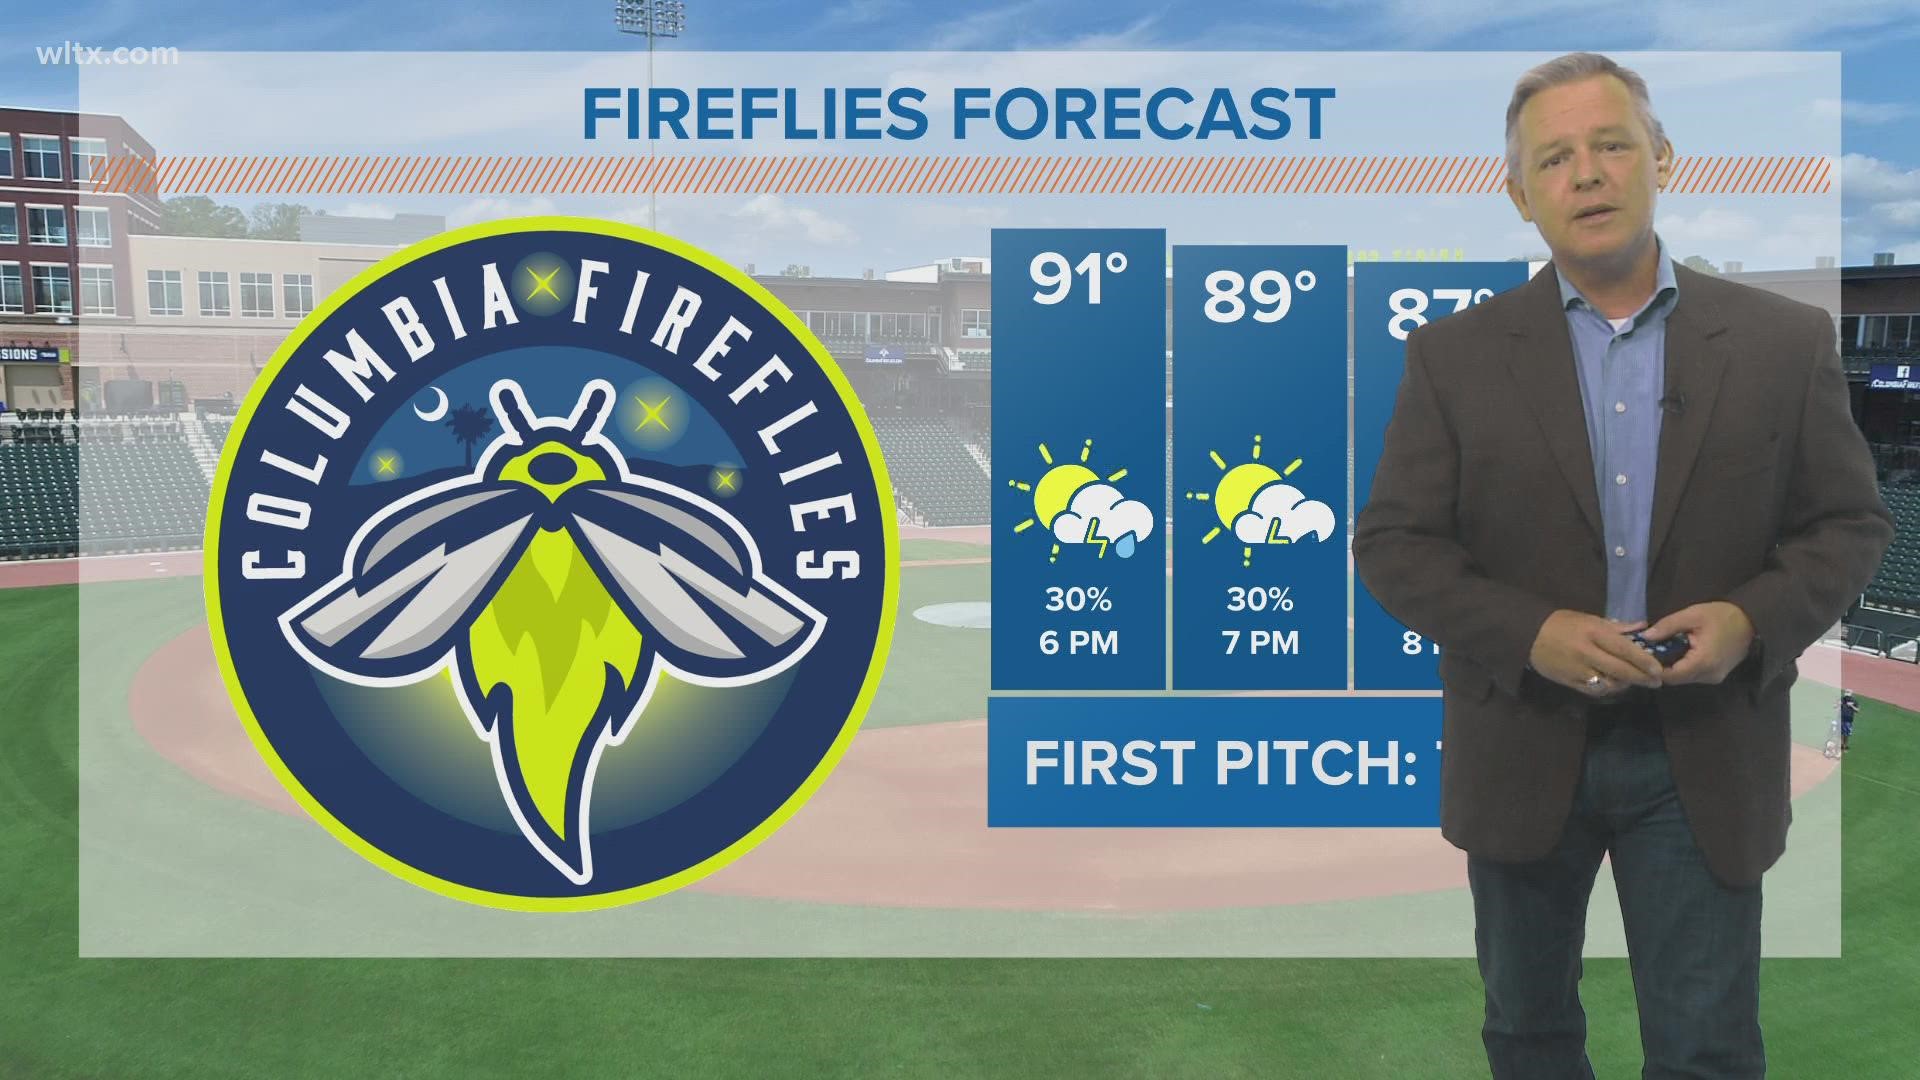 Daniel Bonds has the Columbia Fireflies forecast for August 5, 2022.